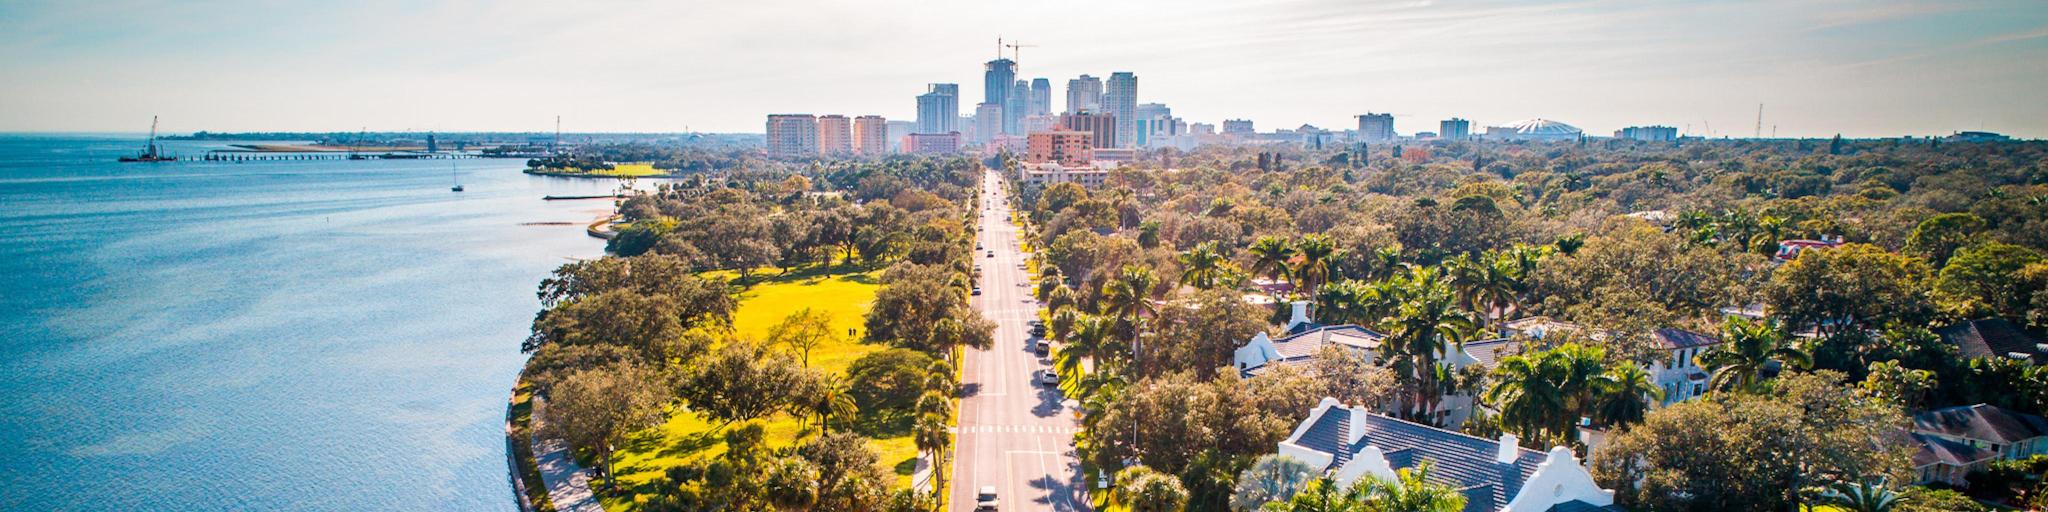 St Petersburg, Florida with a road running alongside the ocean with the city in the background on a sunny day. 